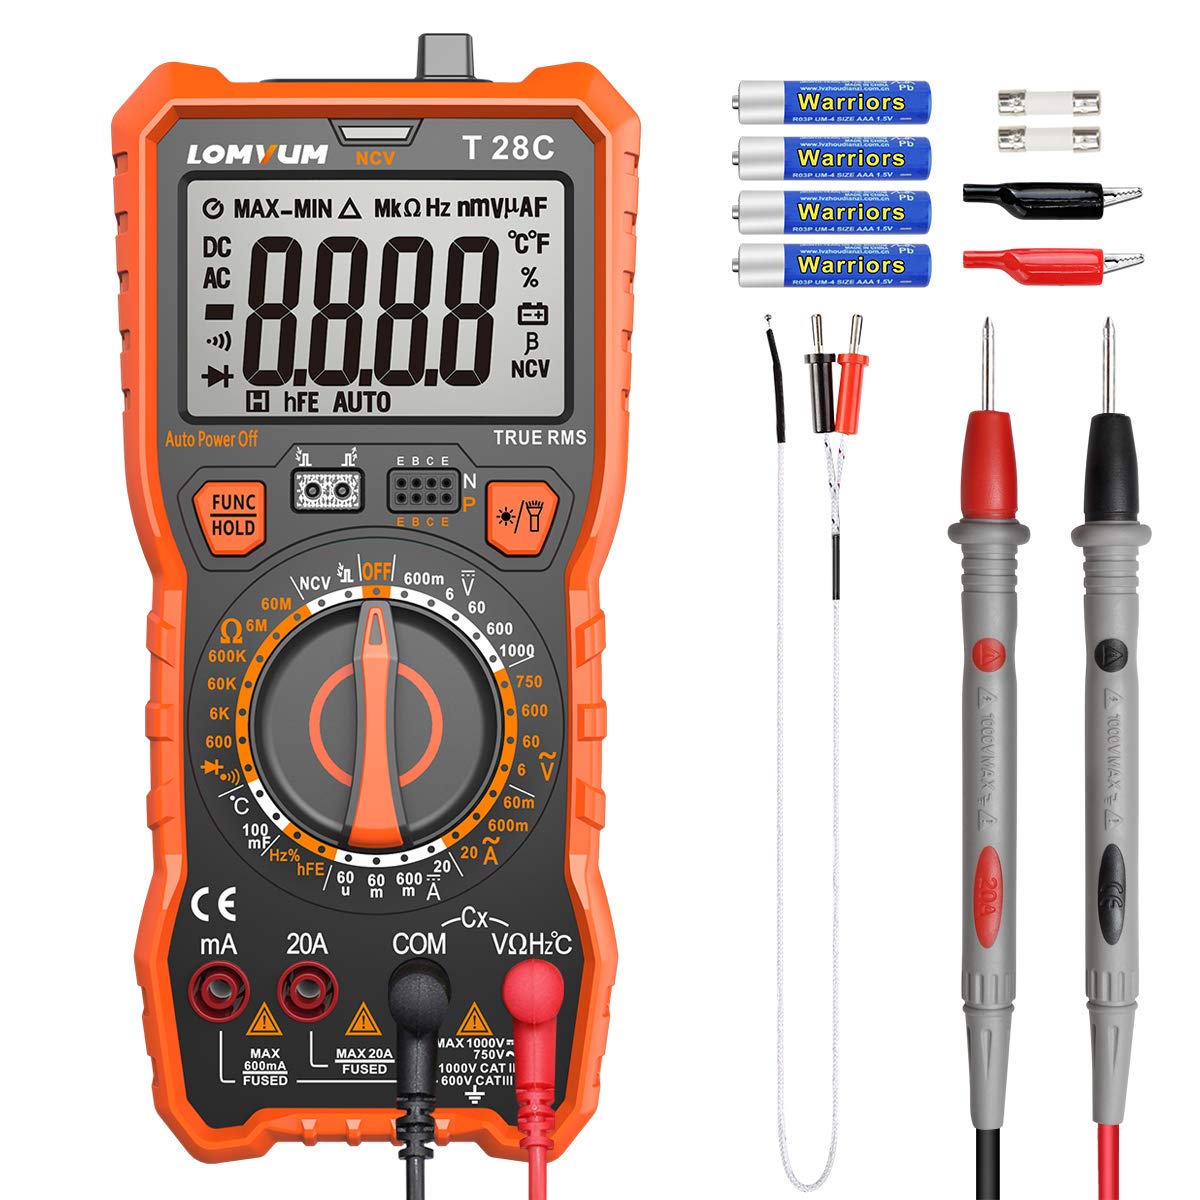 Book Cover Digital Multimeter, LOMVUM TRMS 6000 Counts Electrical Tester AC/DC Amp Ohm Voltage Tester Meter with Temperature Frequency Resistance Continuity Capacitance Diode and Transistor Test